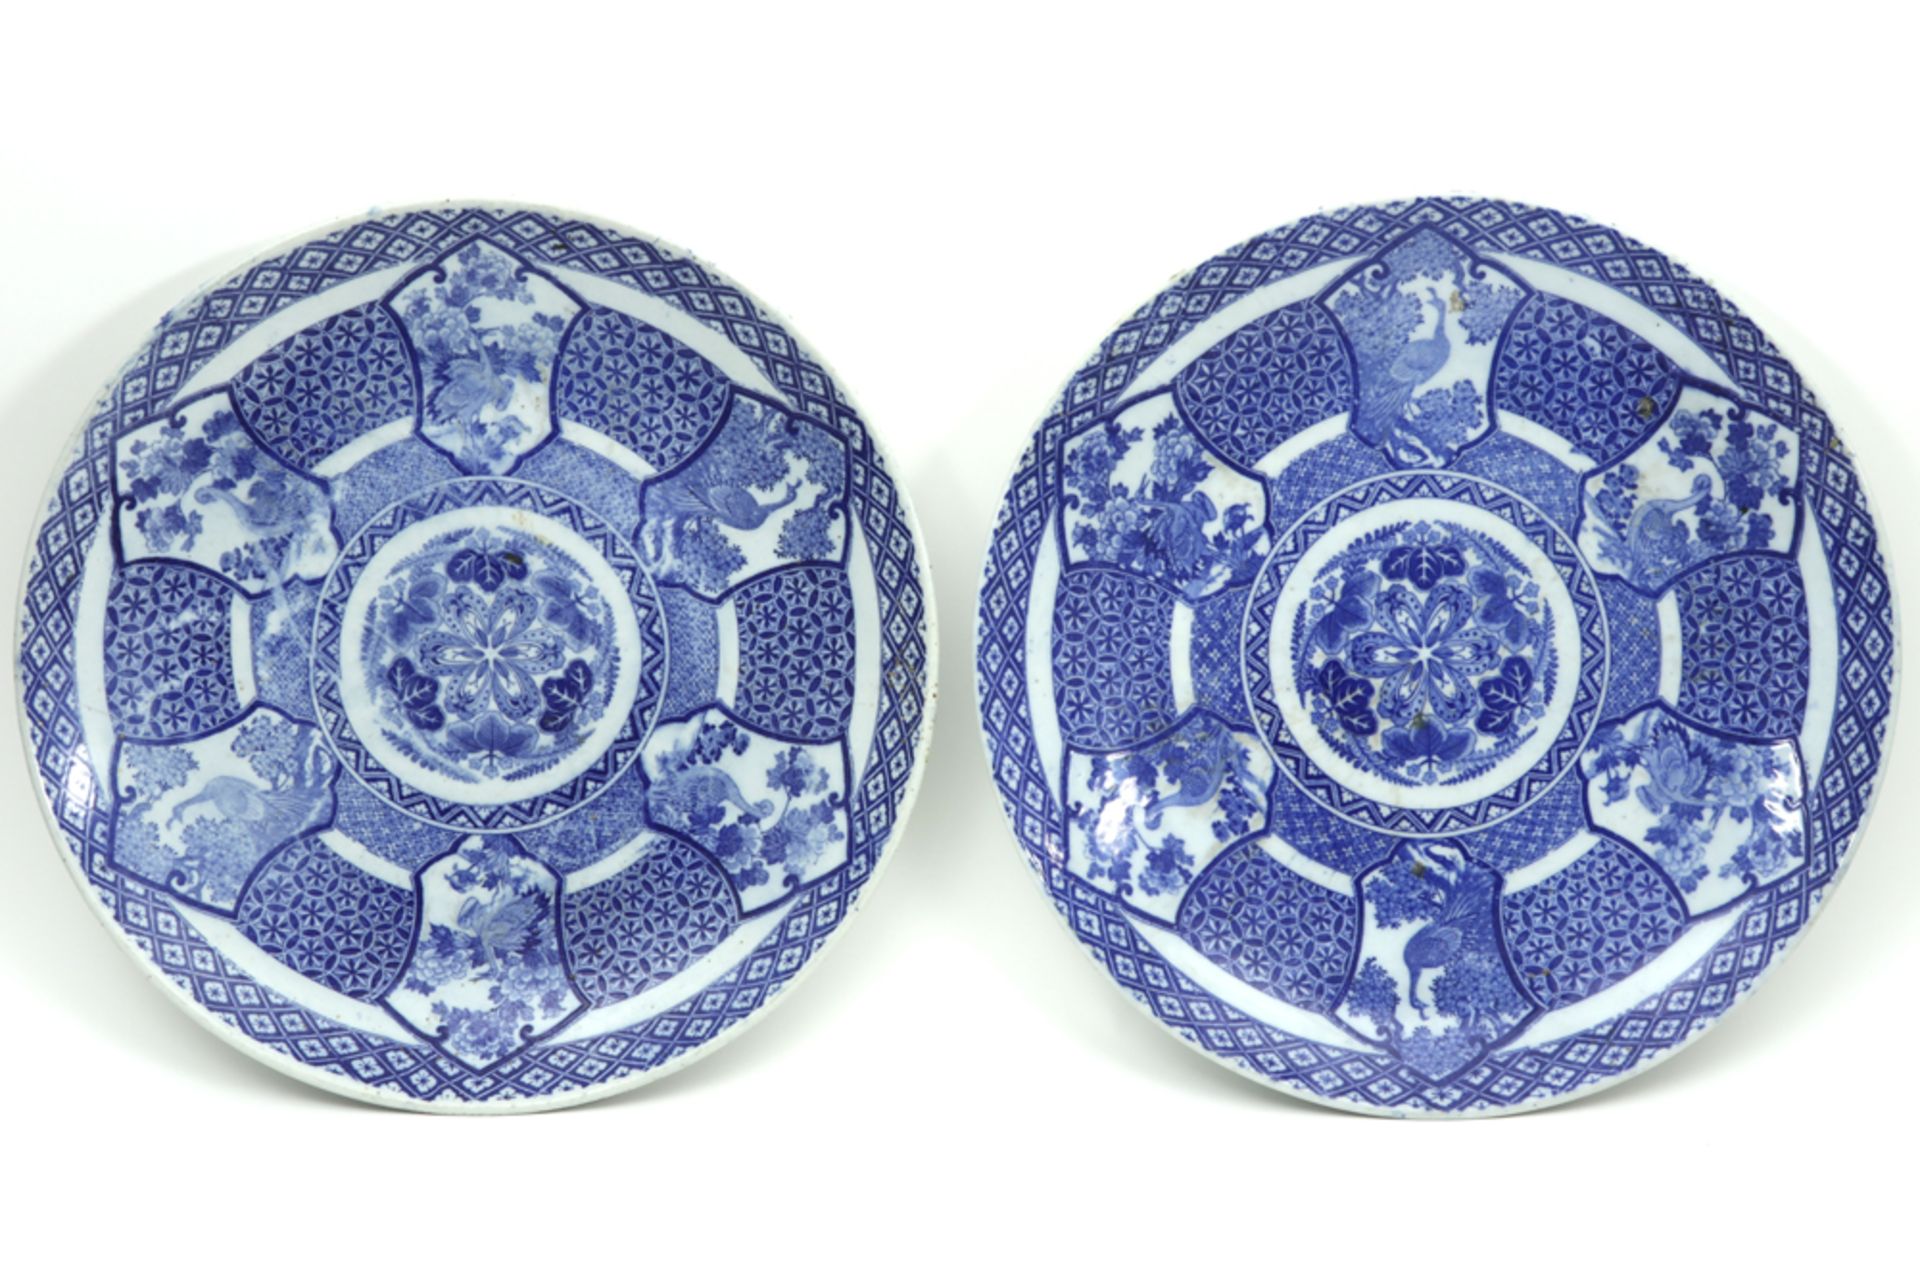 pair of round Meiji period dishes in porcelain with a blue-white decor||Paar ronde Japanse Meiji-